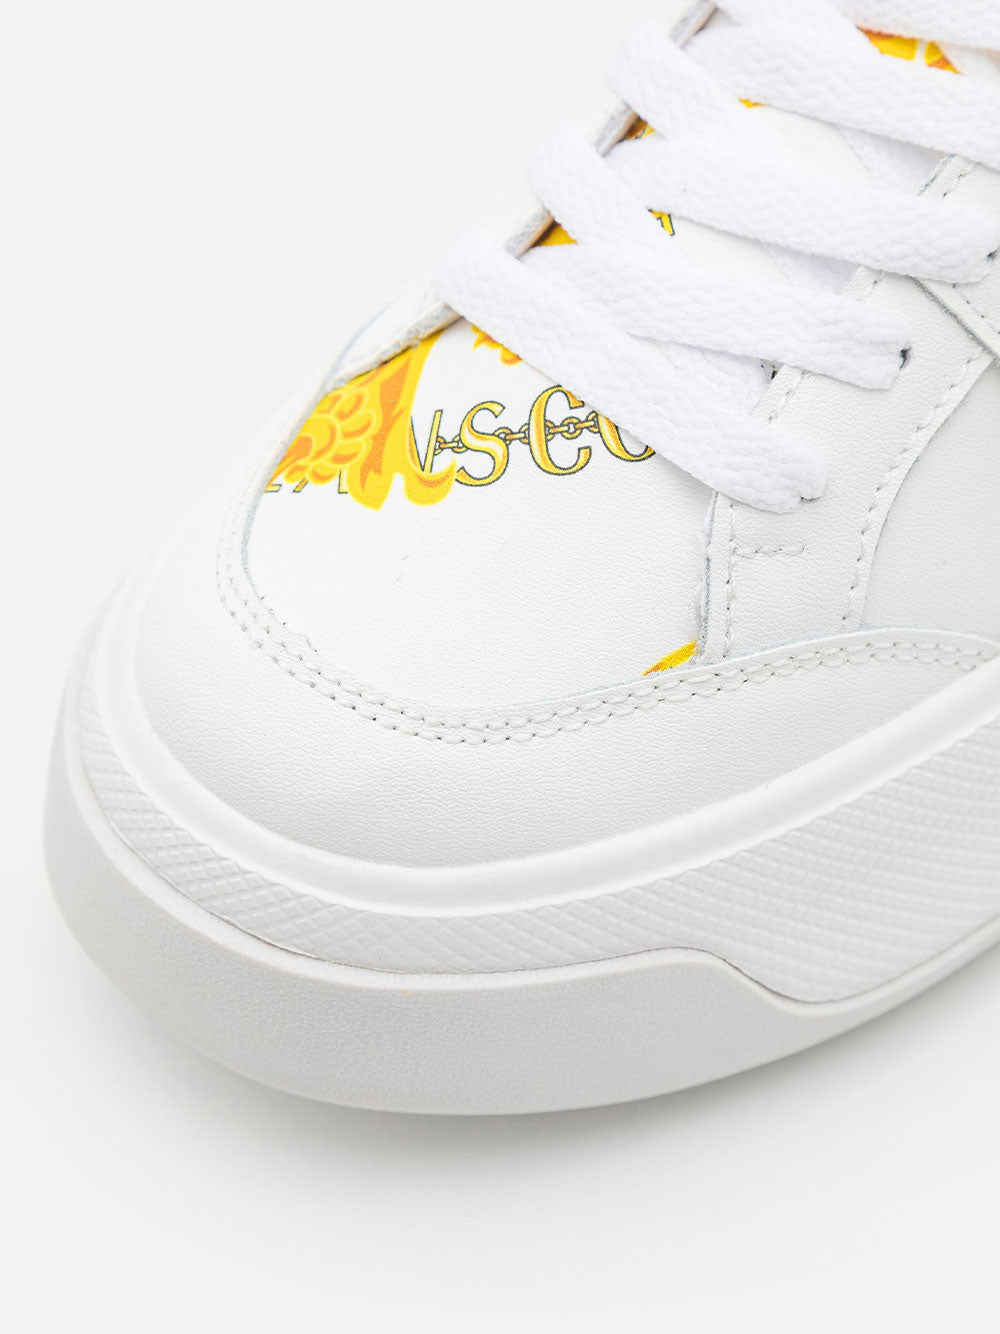 VERSACE COUTURE Sneakers Donna - Bianco